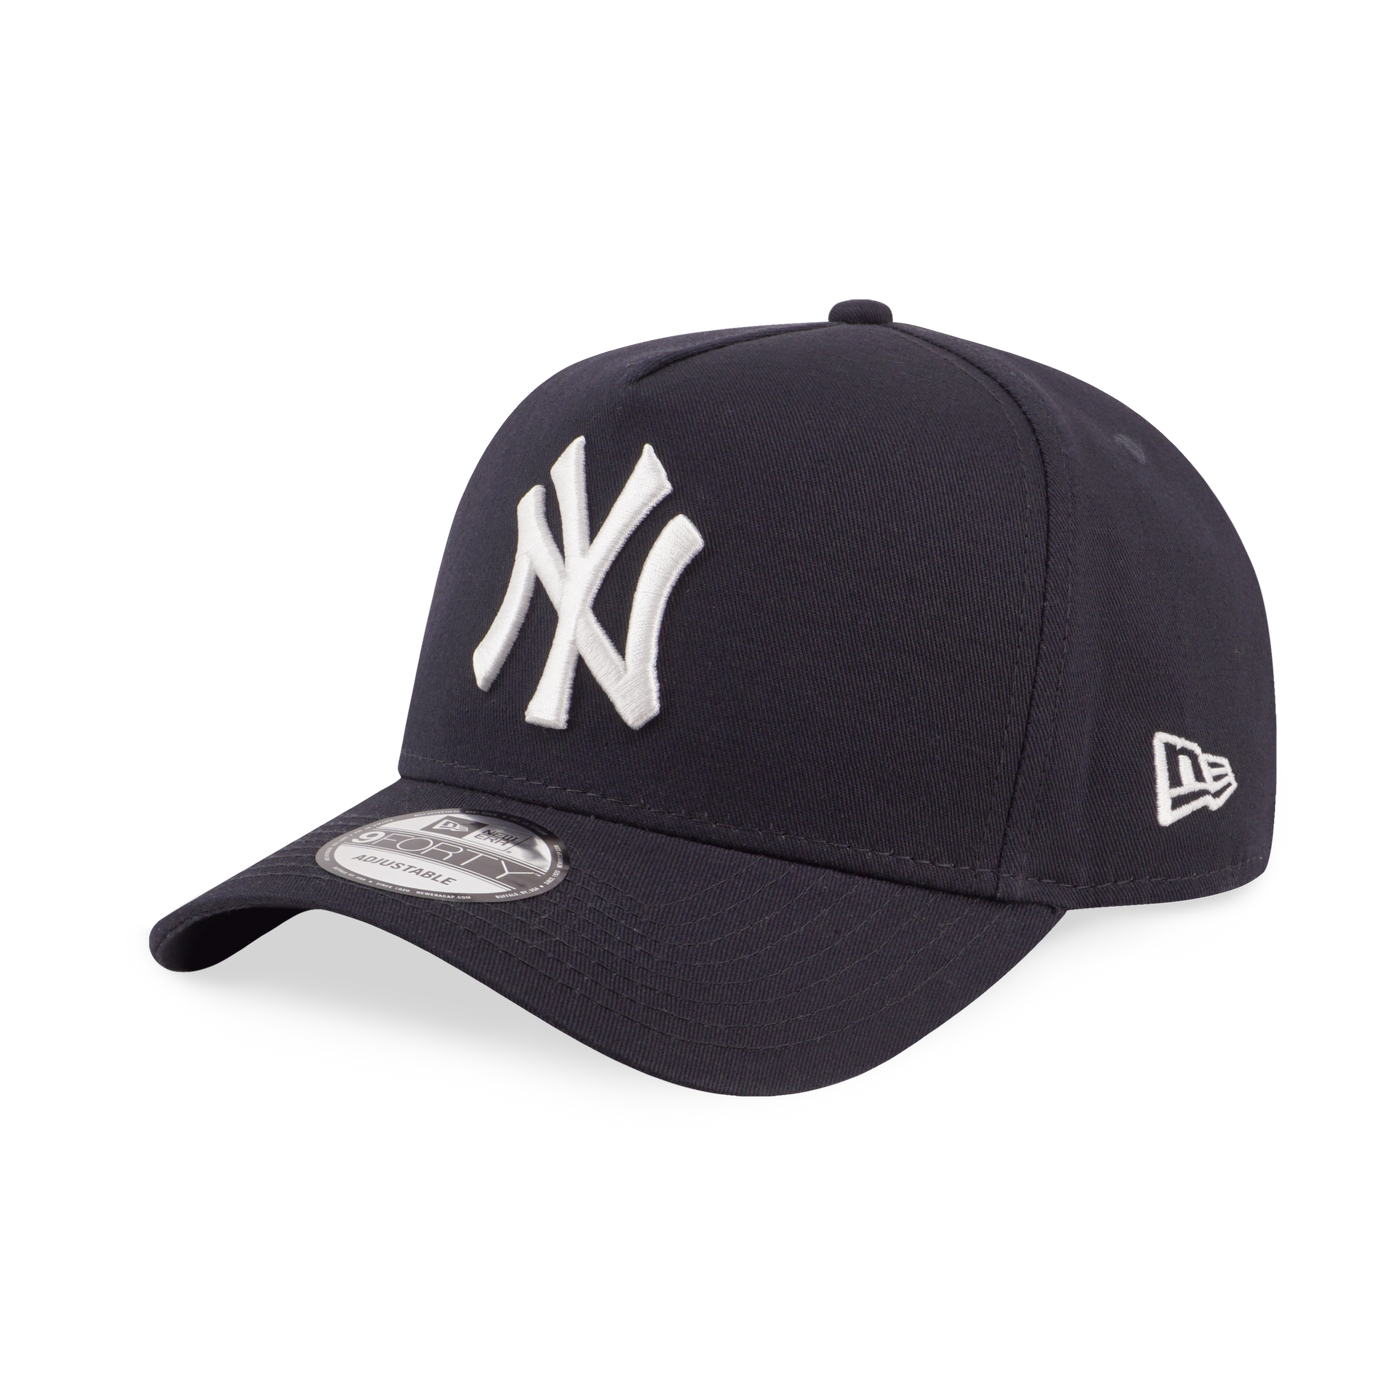 NEW YORK YANKEES LEAGUE 9FORTY A FRAME NAVY 9FORTY AF CAP